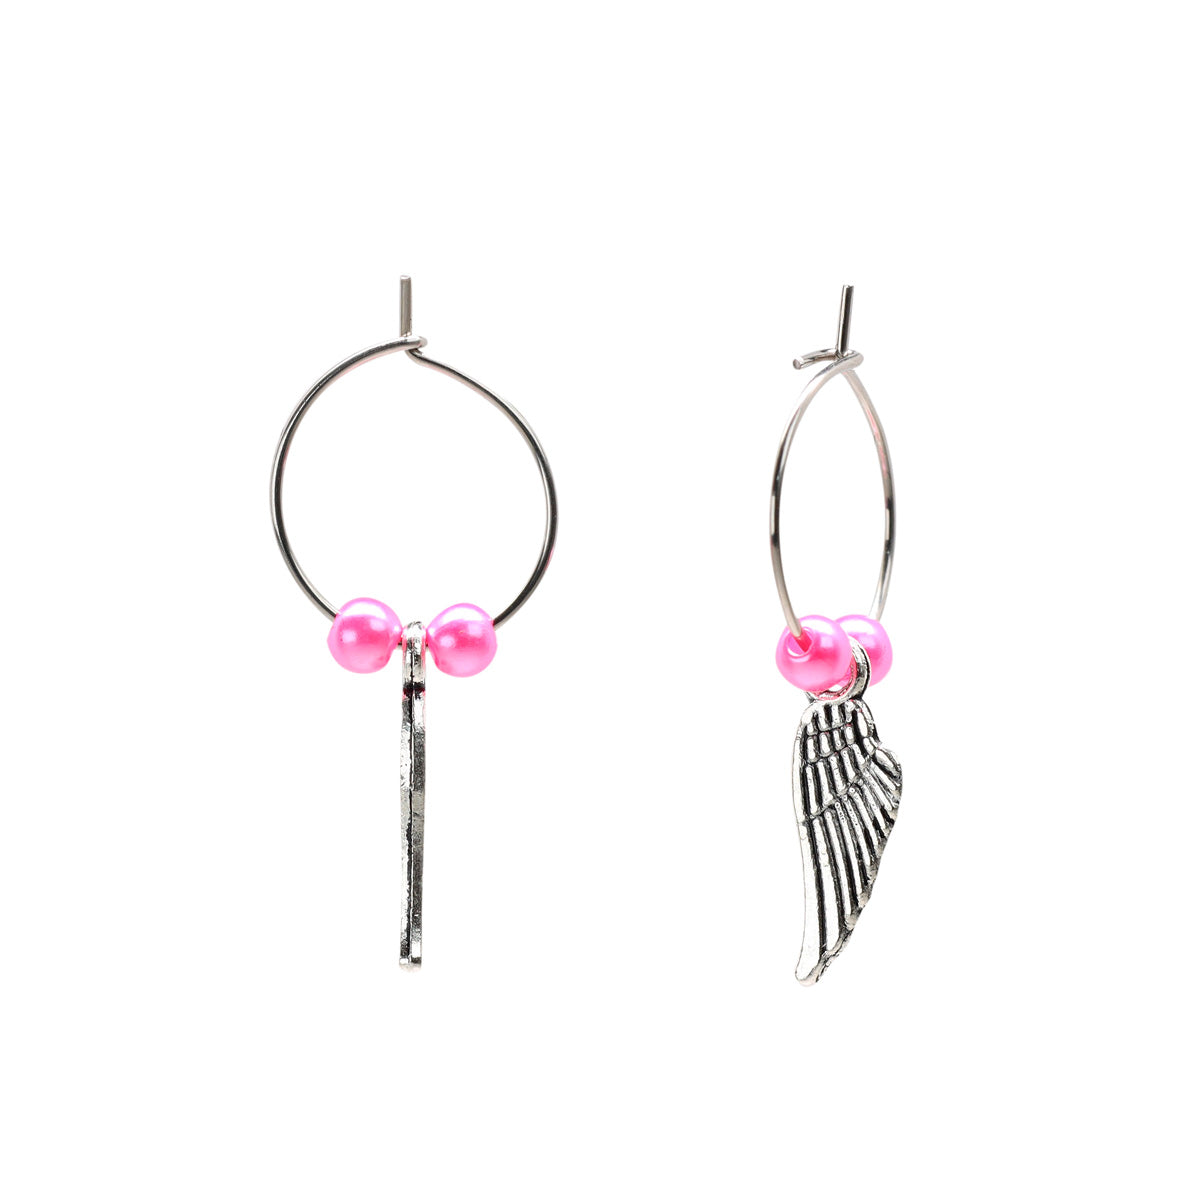 Ring hanging wing earring (steel)